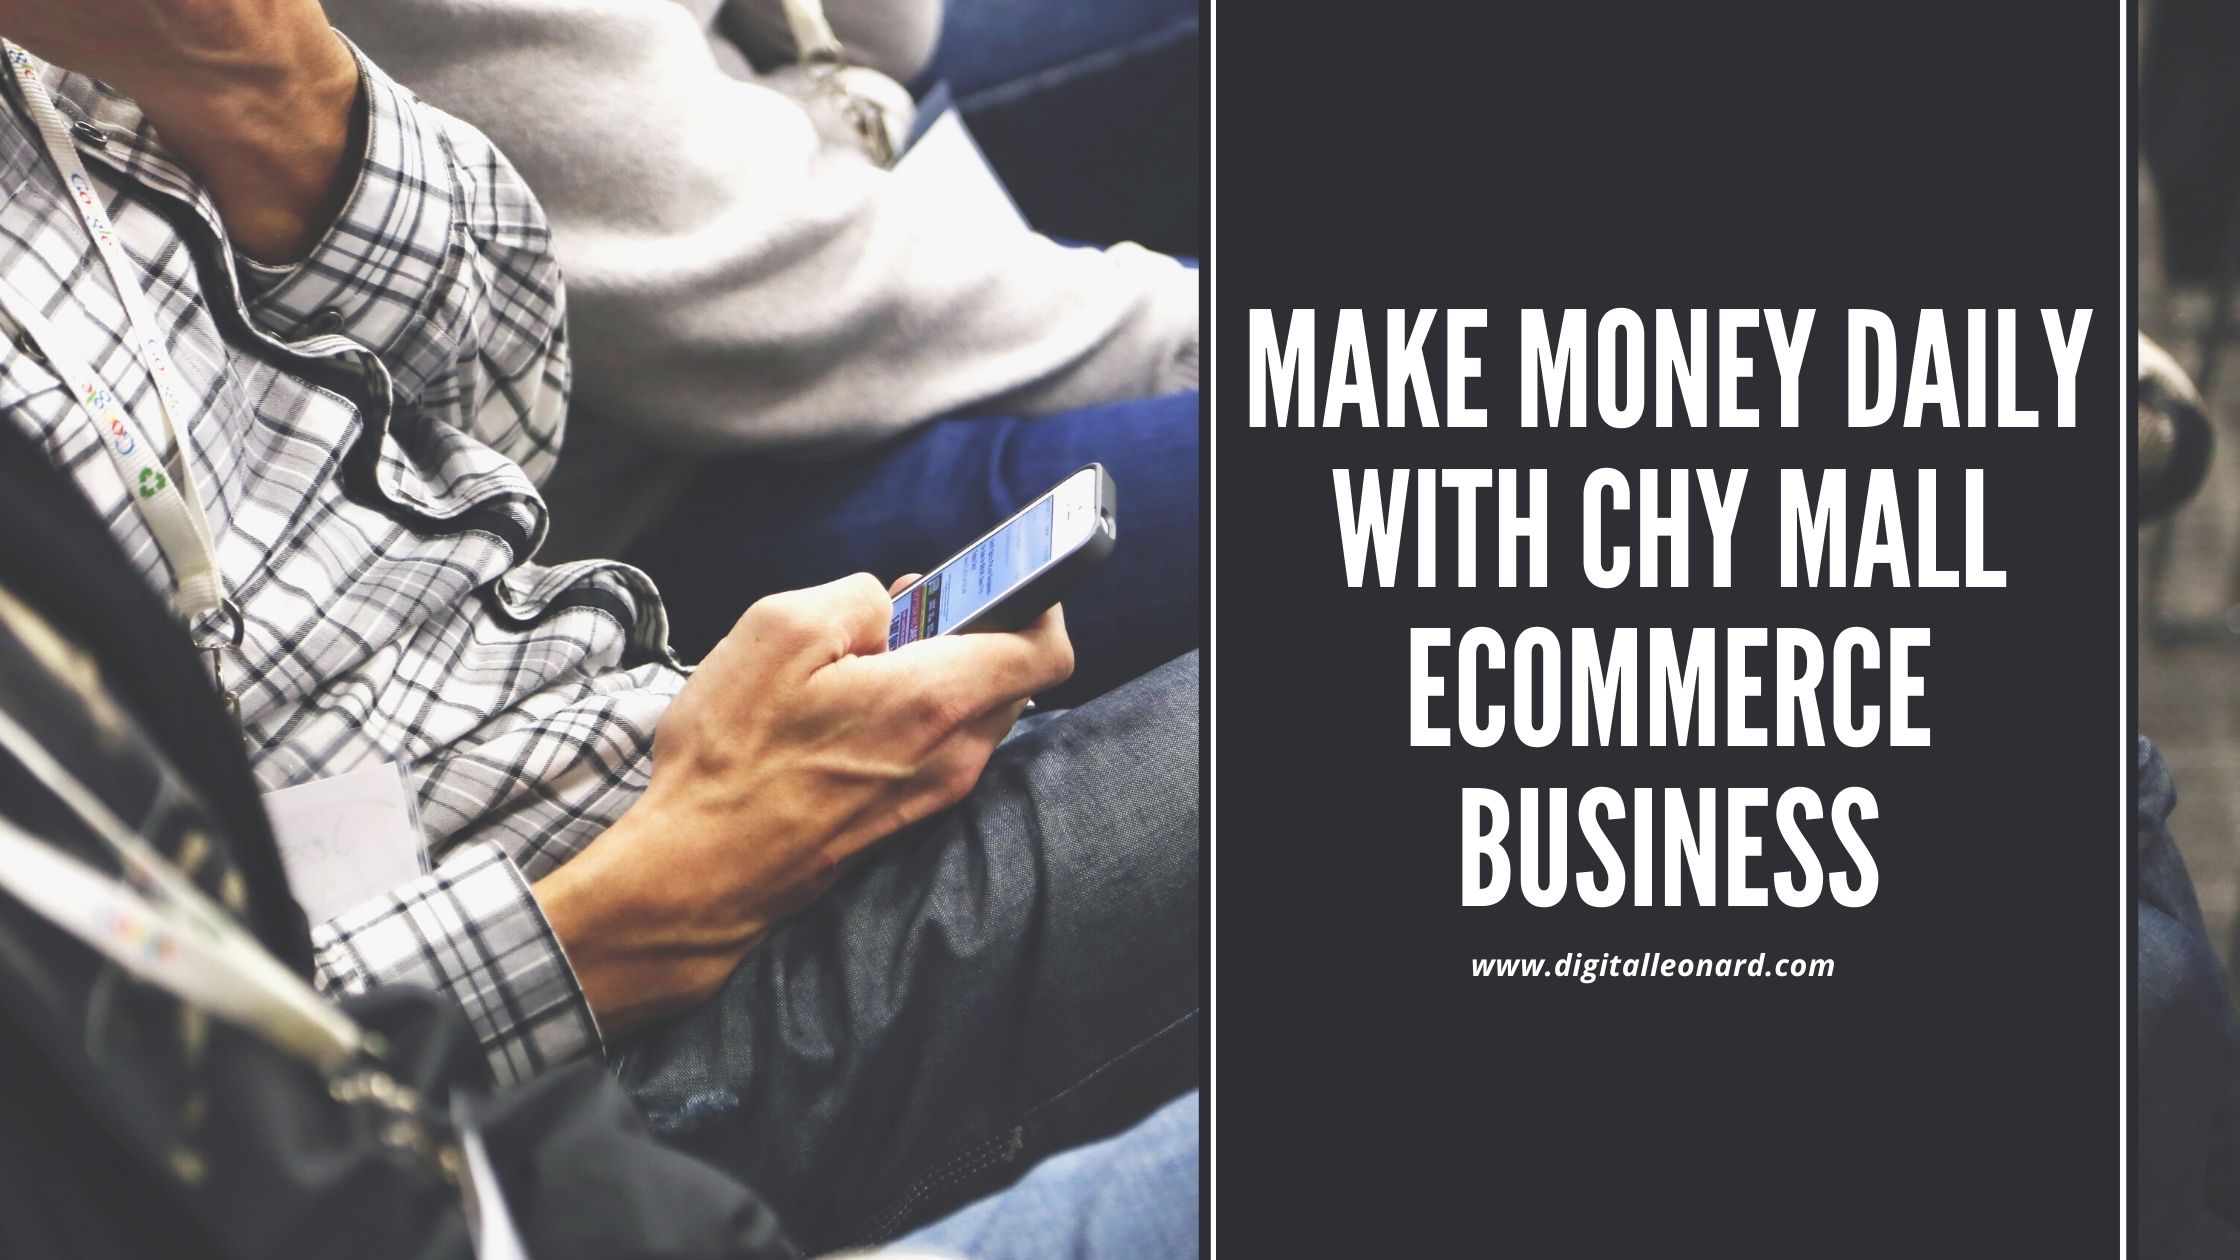 You are currently viewing Chy Mall Ecommerce Business